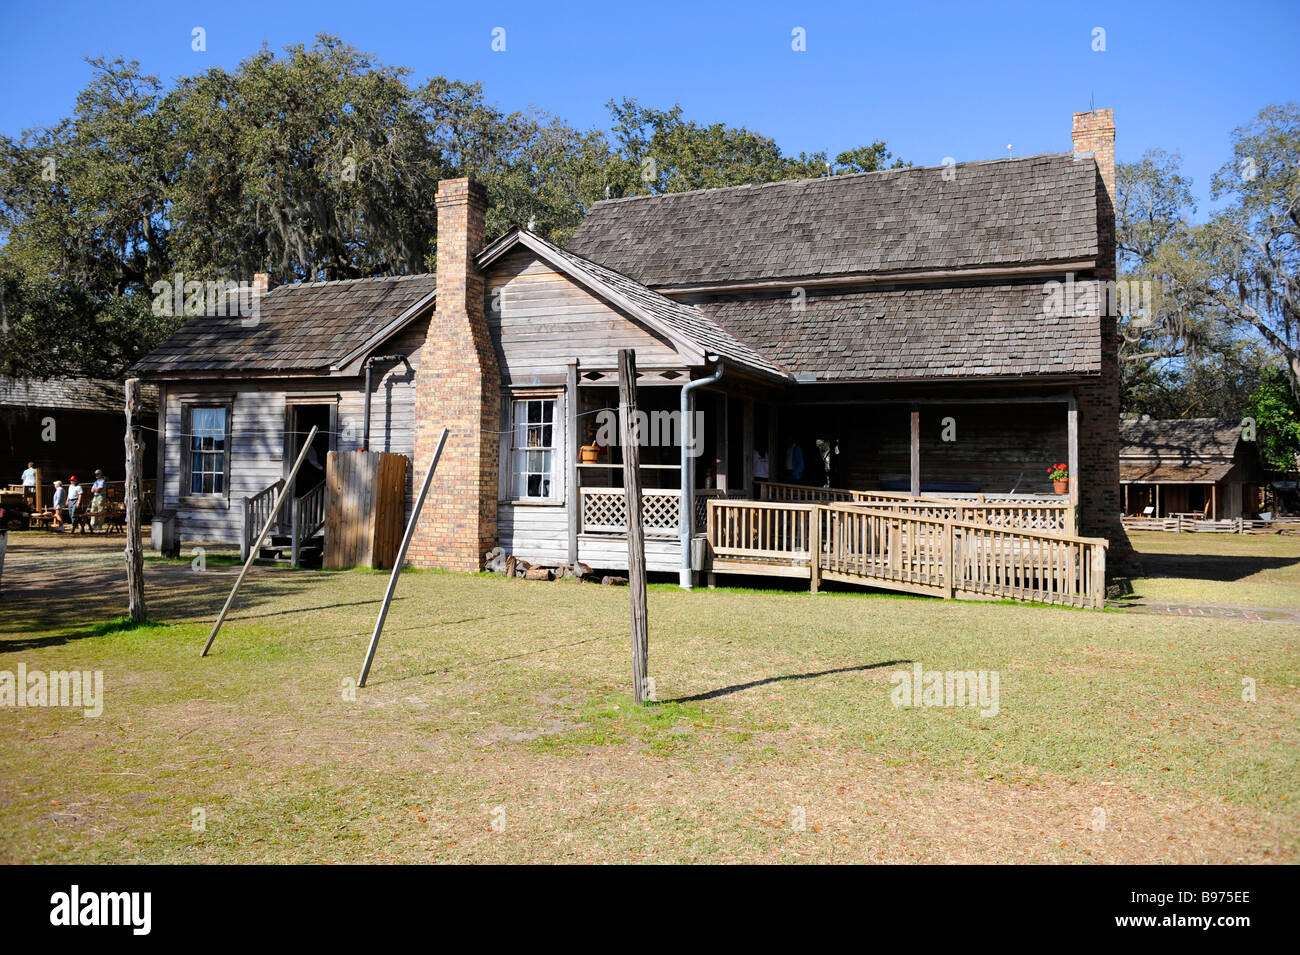 Carlton House Circa 1885 from Wauchula Florida at Cracker Country Florida living history museum located on the Florida State Fai Stock Photo